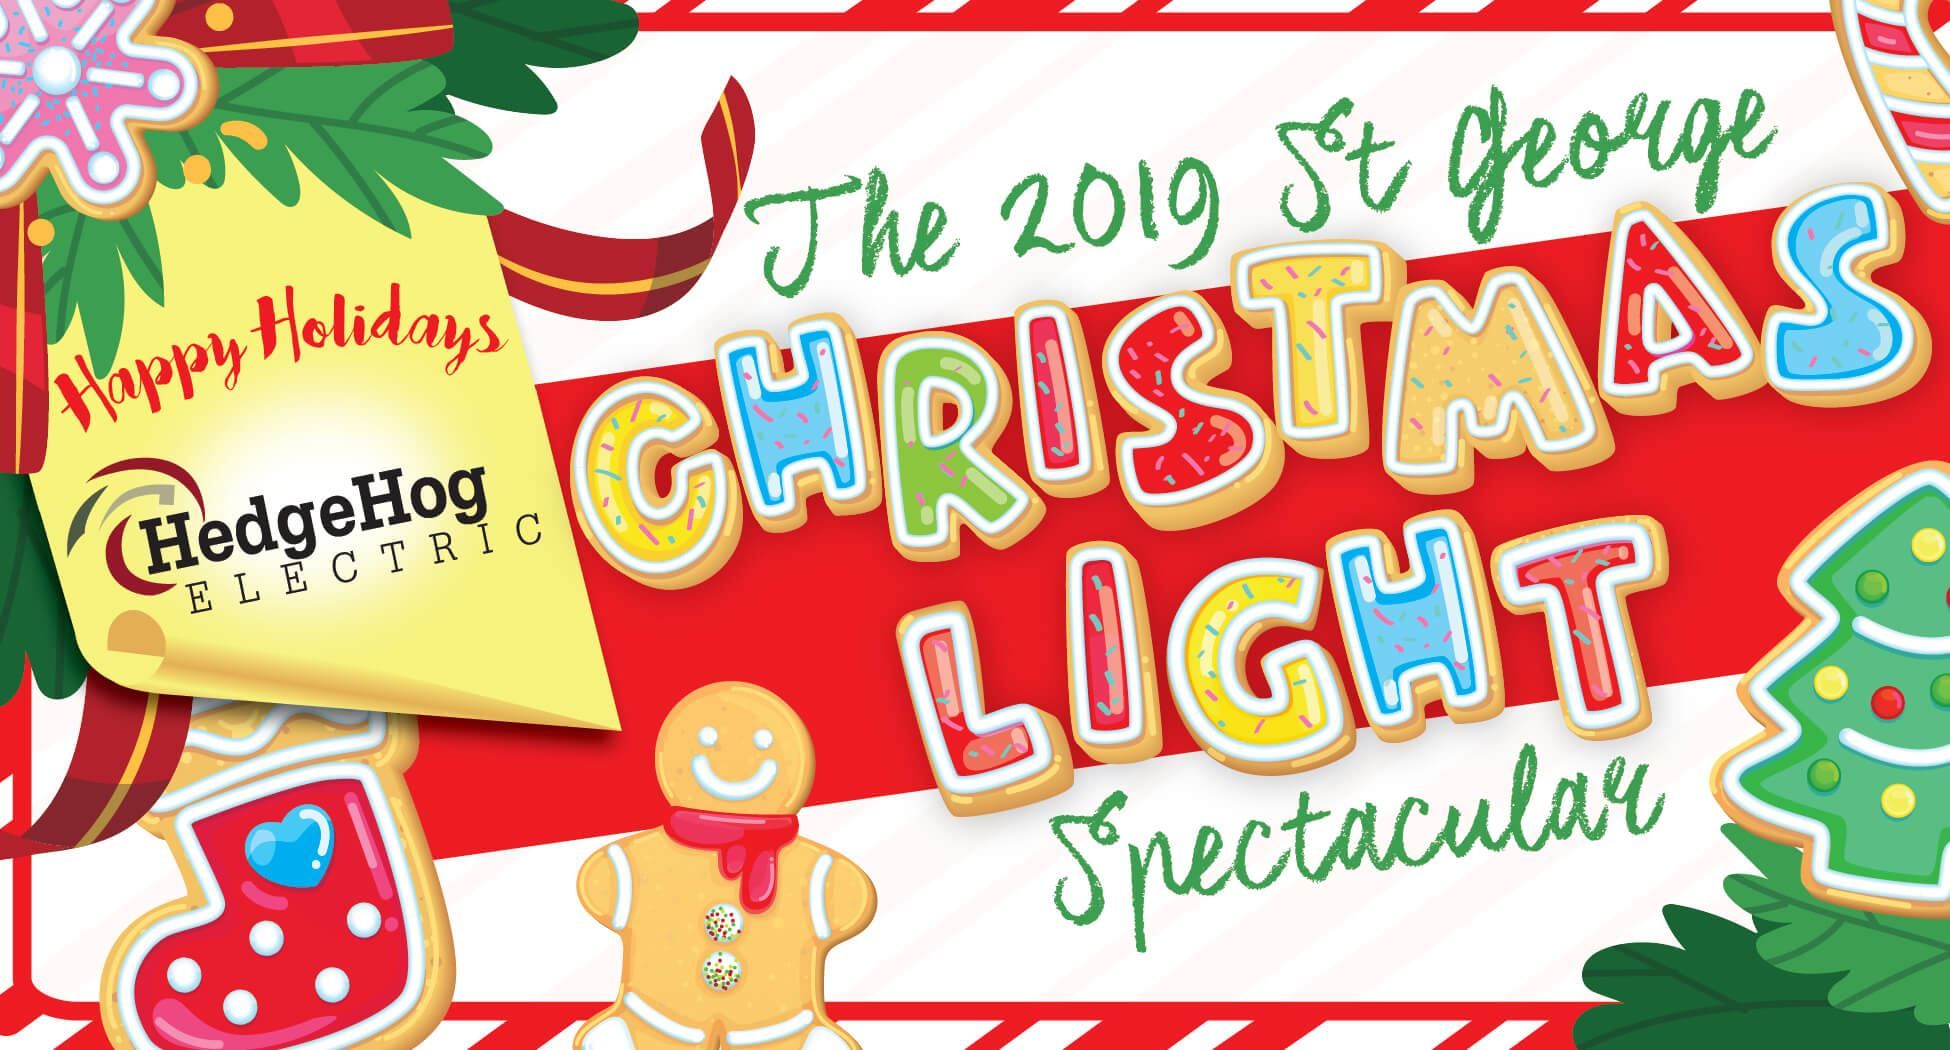 The 2019 St. George Christmas Light Spectacular by Hedgehog Electric | HedgeHog Electric